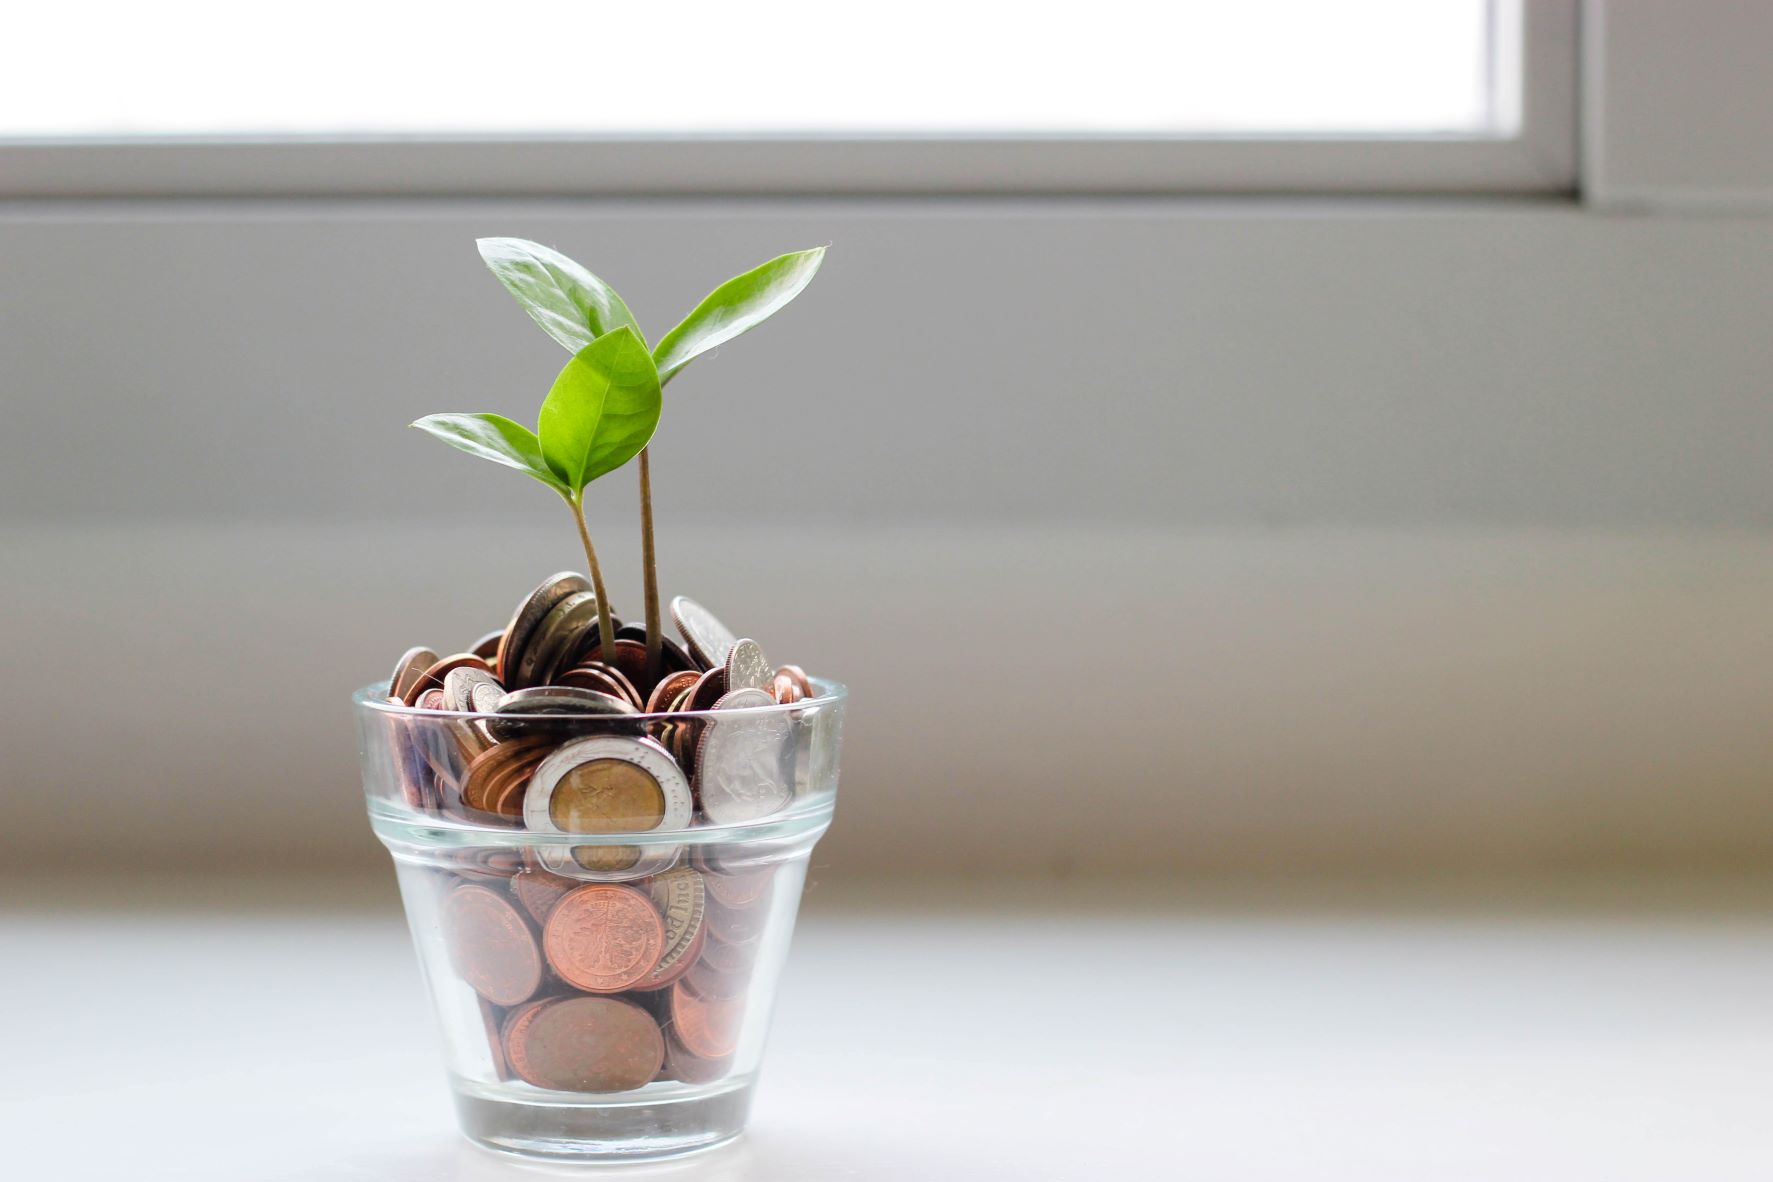 Plant growing through a pot of coins in a clear jar